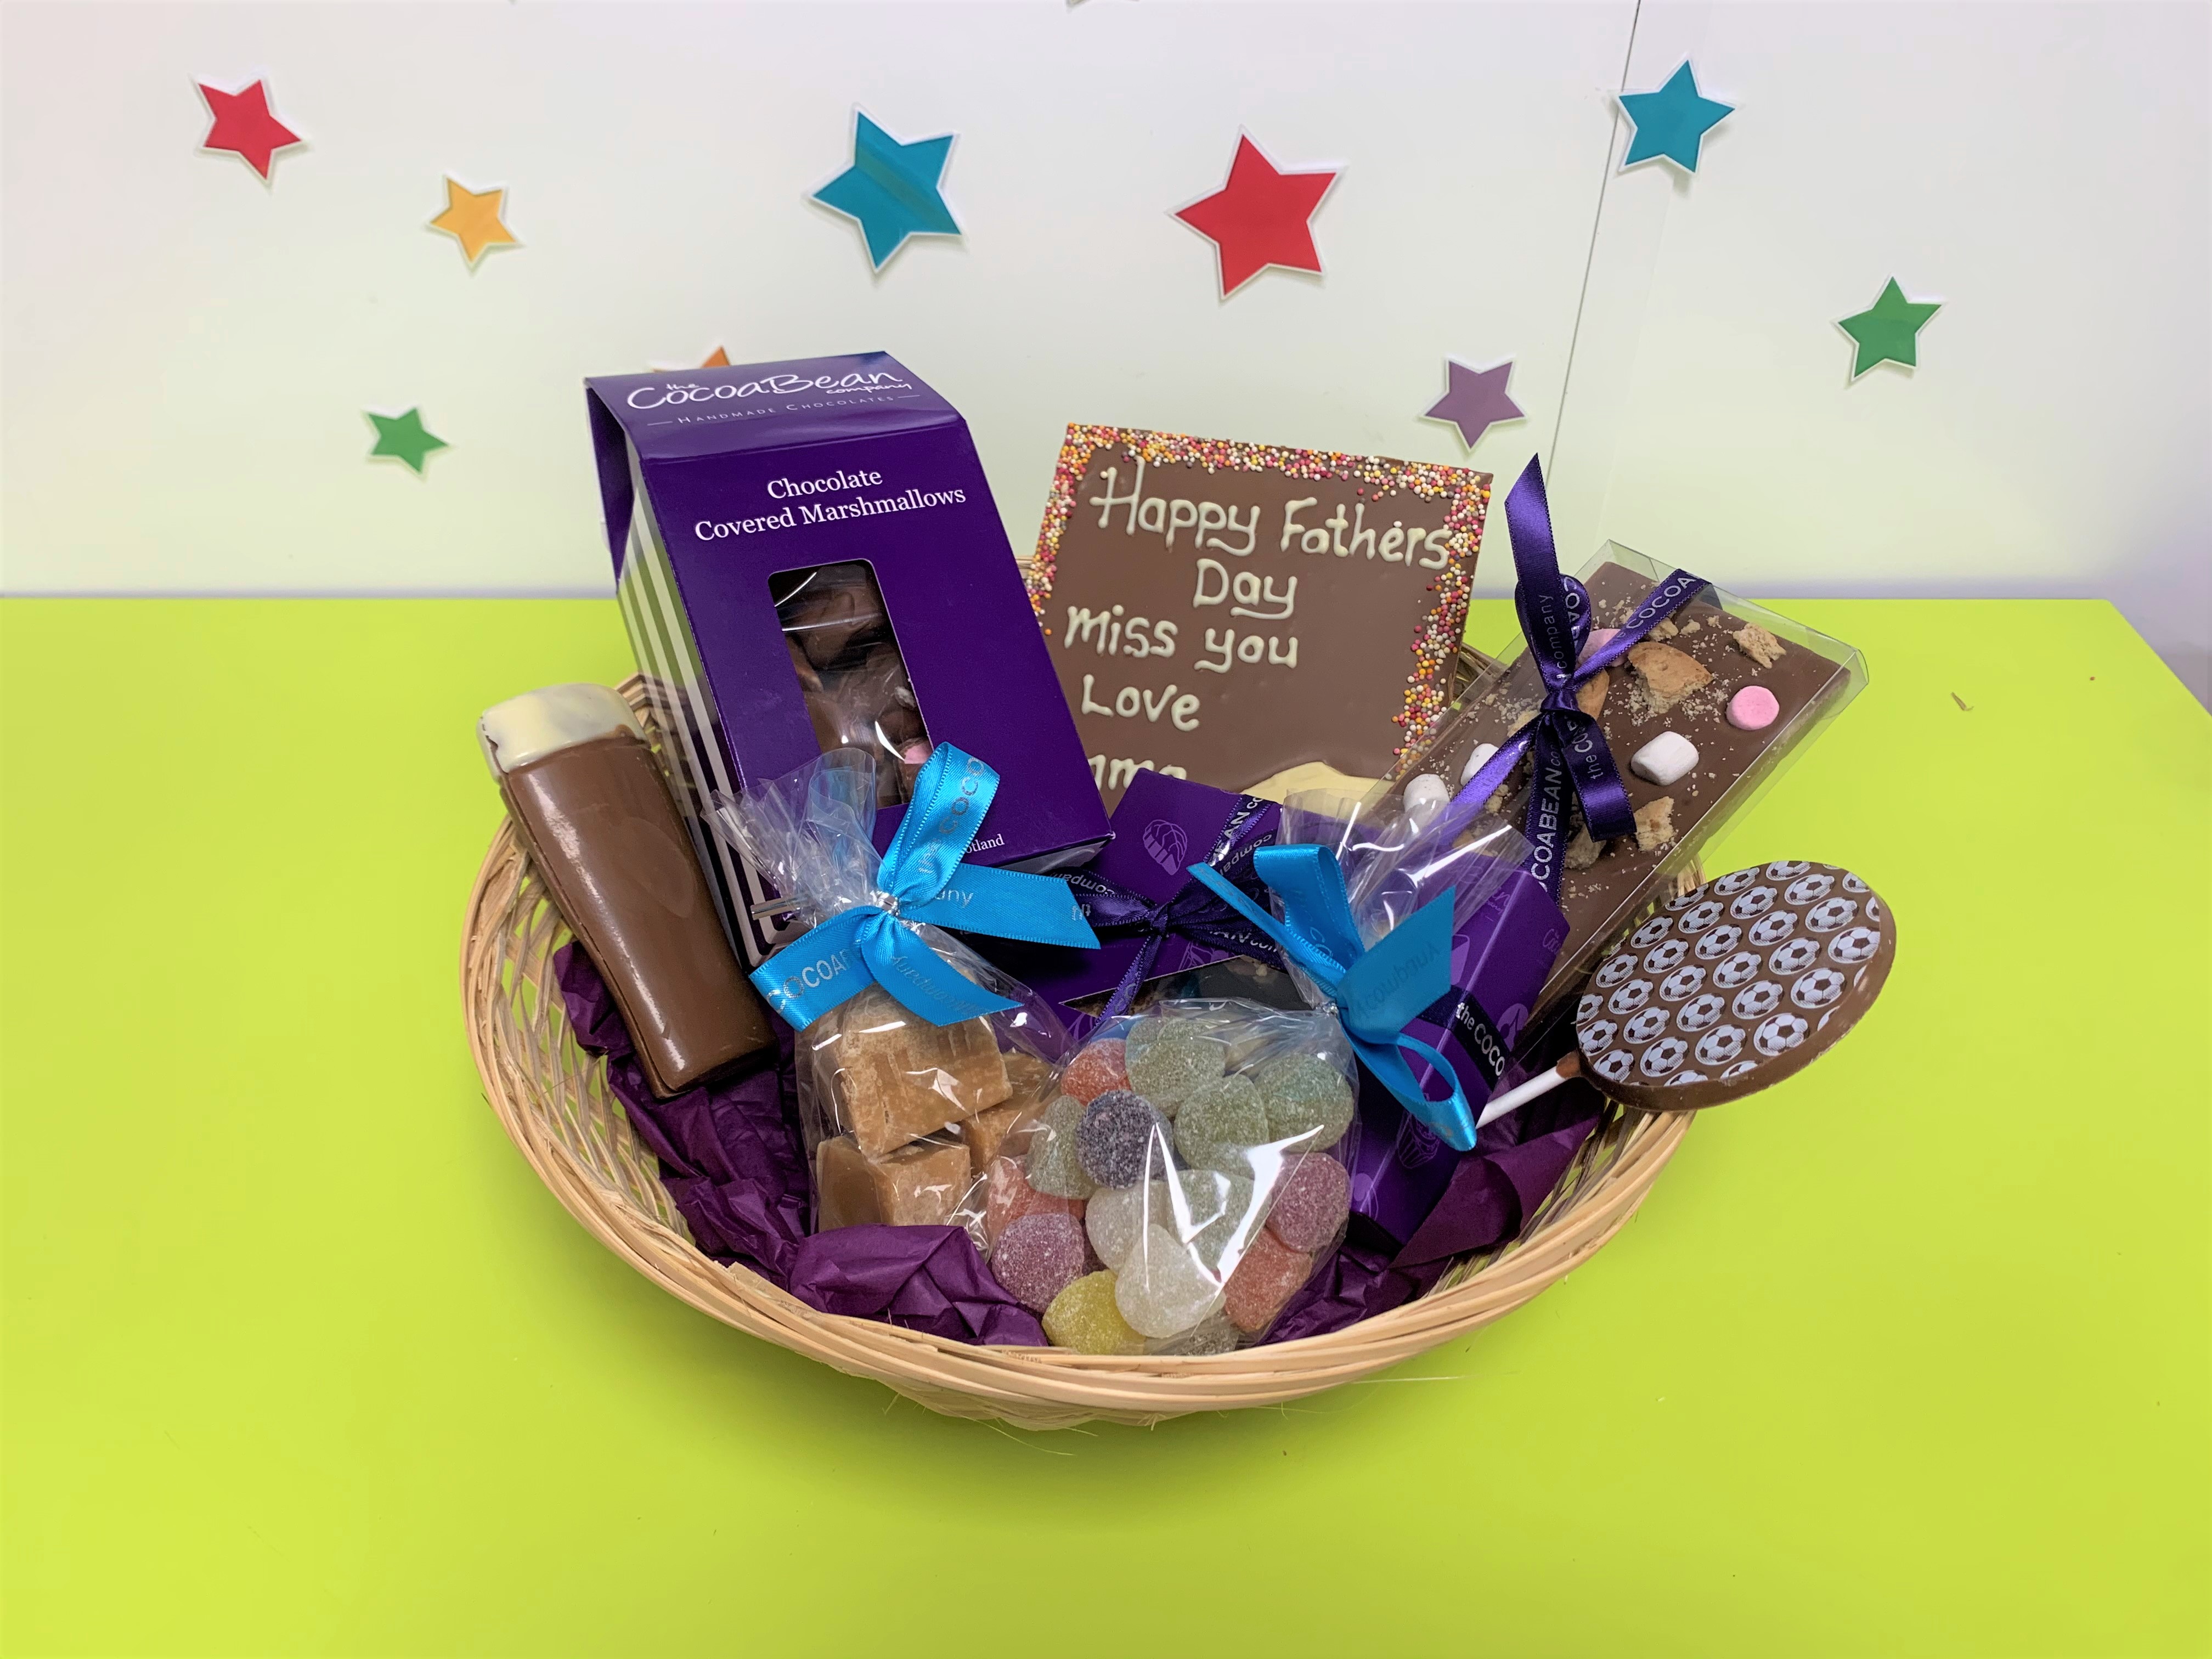 Luxury Gift Hamper For Him The Cocoabean Company